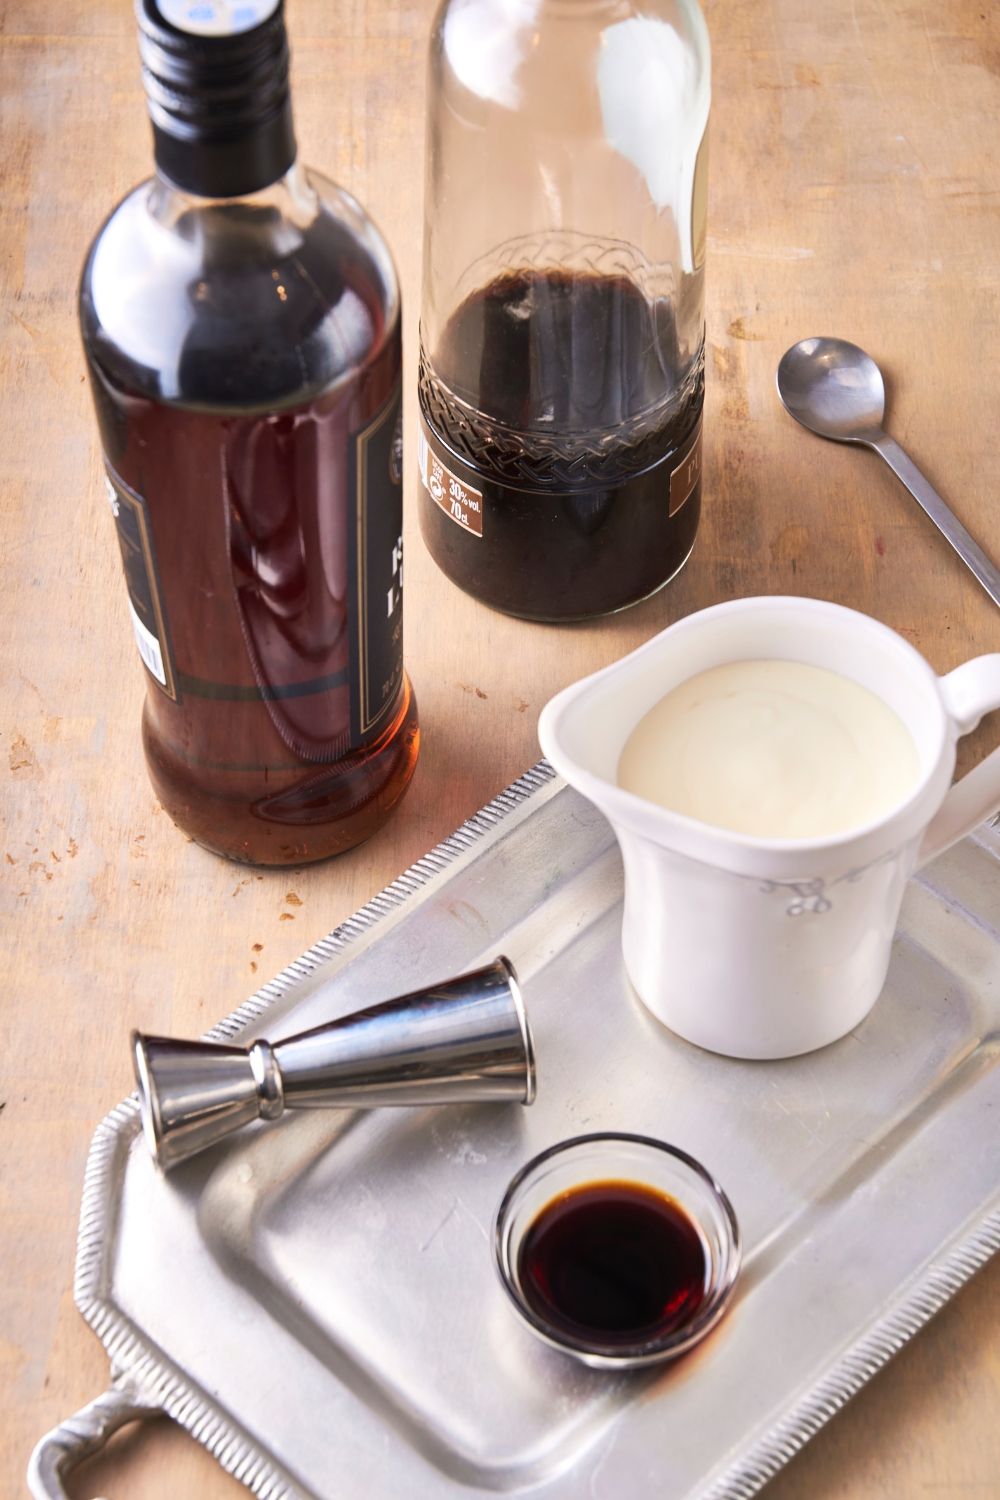 A tray with a pitcher of heavy cream, a small bowl of vanilla extract, a measuring cup, and two bottles of bourbon next to the tray.